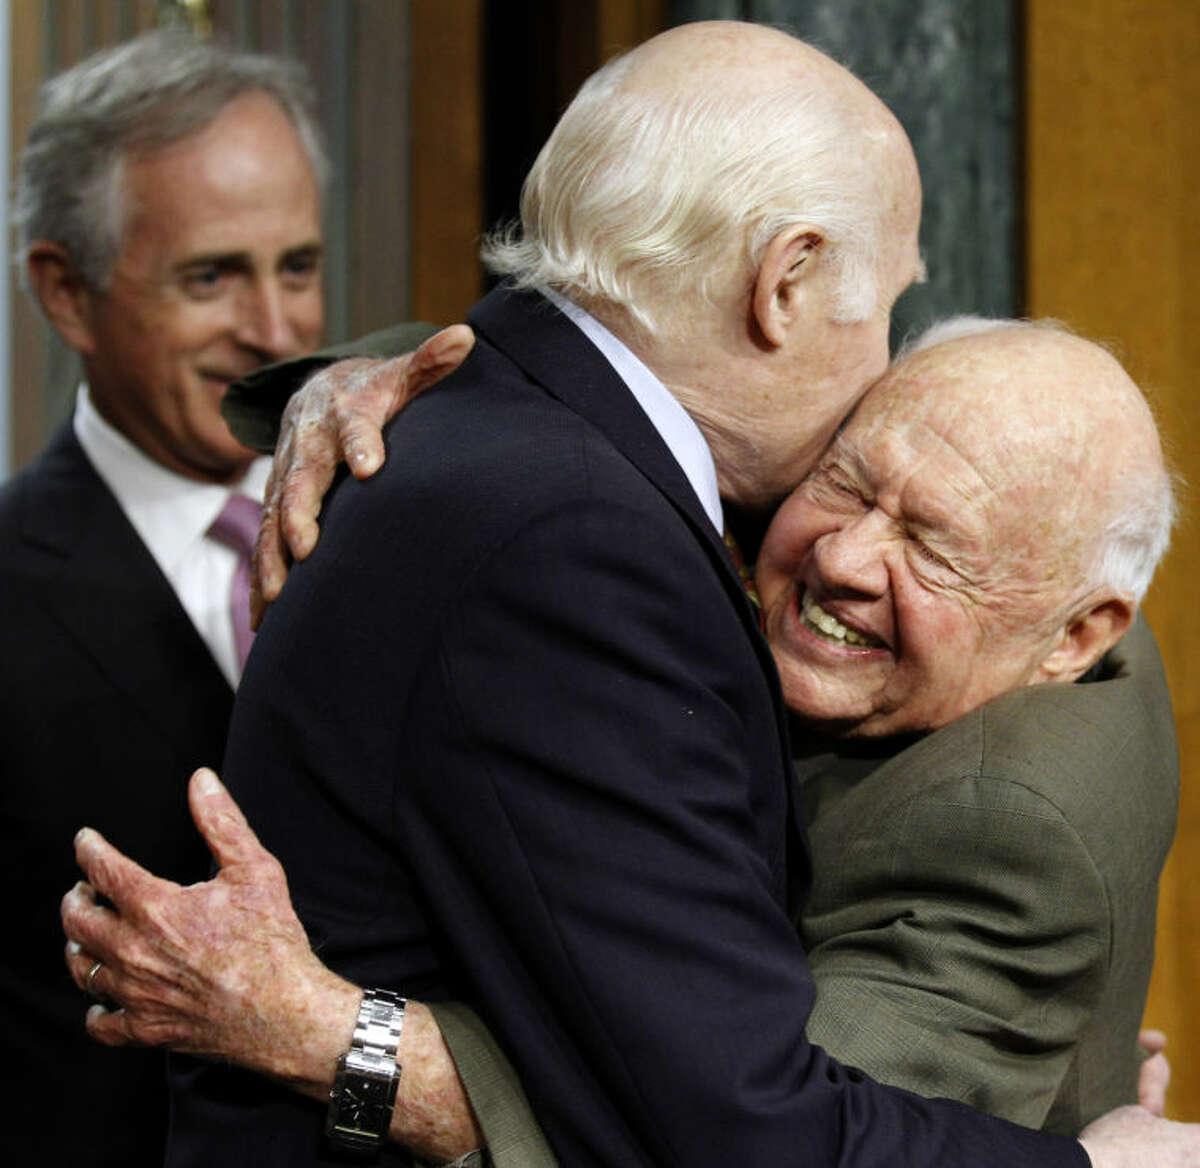 FILE - In this Wednesday, March 2, 2011, file photo, Senate Aging Committee Chairman Sen. Herb Kohl. D-Wis., center, gets a hug from entertainer Mickey Rooney, right, on Capitol Hill in Washington, as Sen. Bob Corker, R-Tenn., looks on at left, prior to Rooney testifying about elder abuse, before the committee. Rooney, a Hollywood legend whose career spanned more than 80 years, has died. He was 93. Los Angeles Police Commander Andrew Smith said that Rooney was with his family when he died Sunday, April 6, 2014, at his North Hollywood home. (AP Photo/Alex Brandon, File)